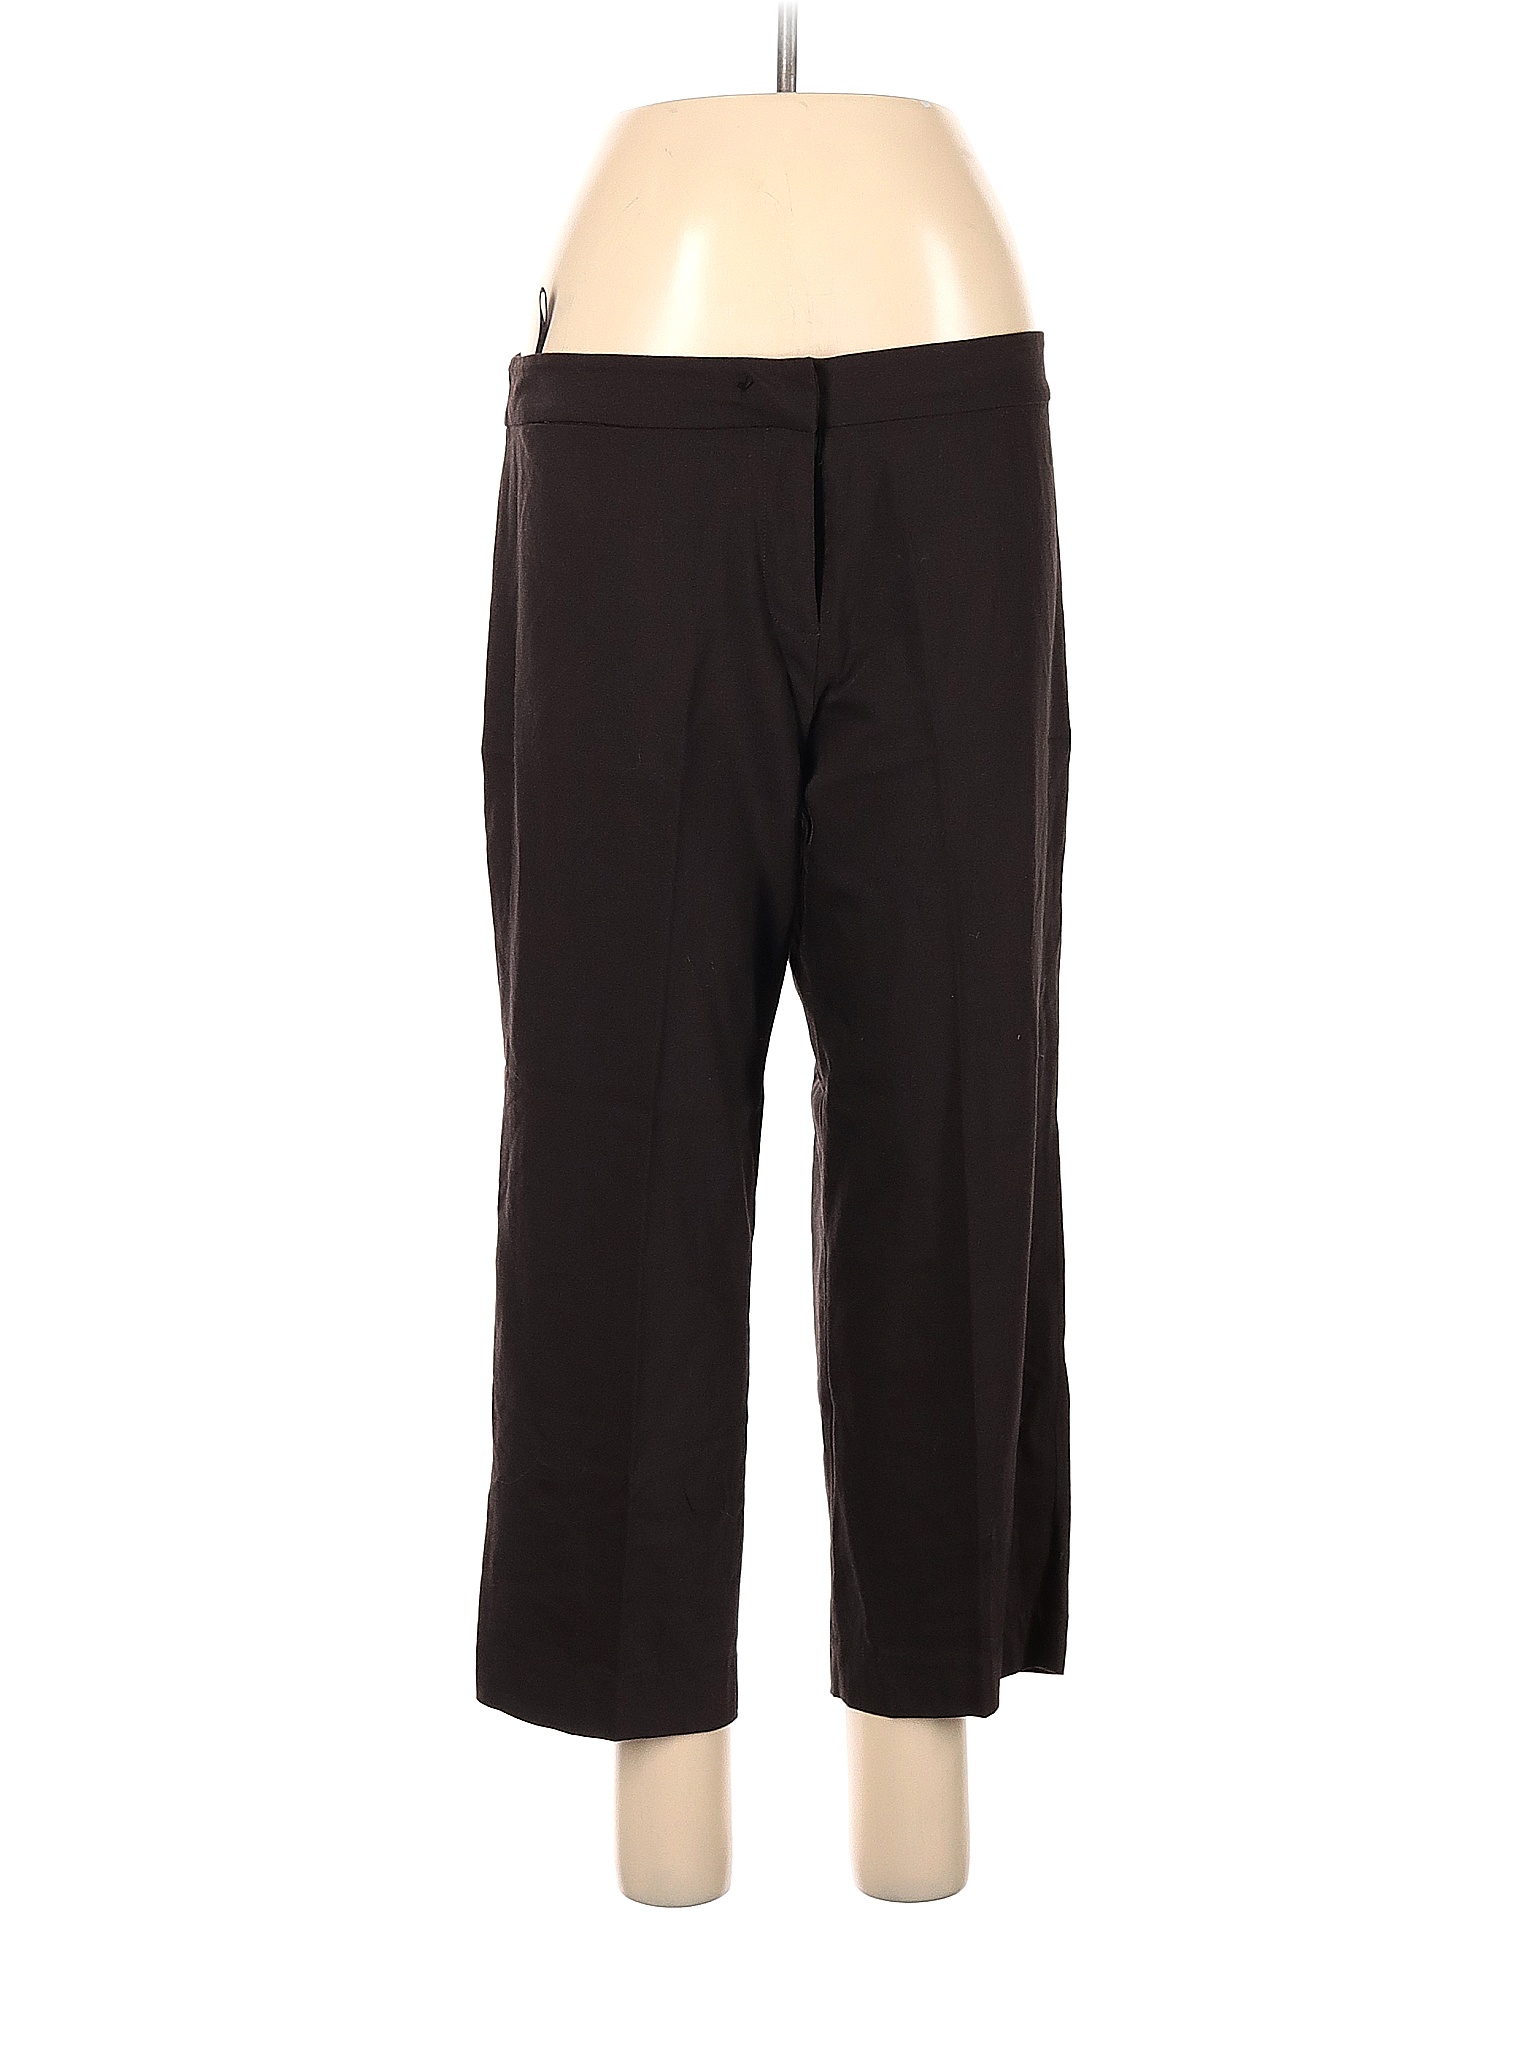 Eileen Fisher Solid Black Brown Dress Pants Size L (Petite) - 78% off ...